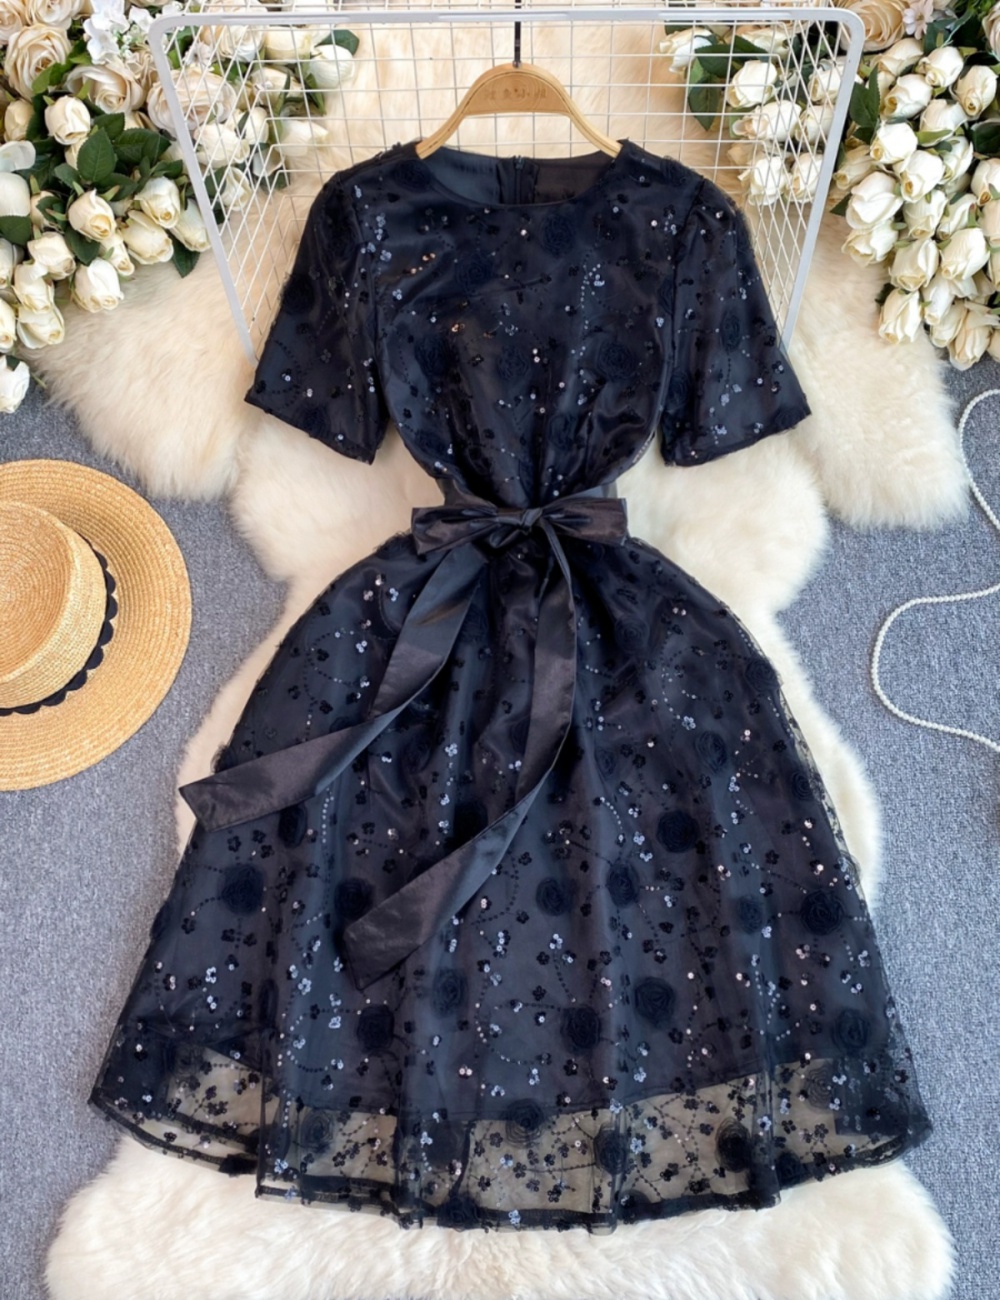 Sequins dress embroidery small dress for women